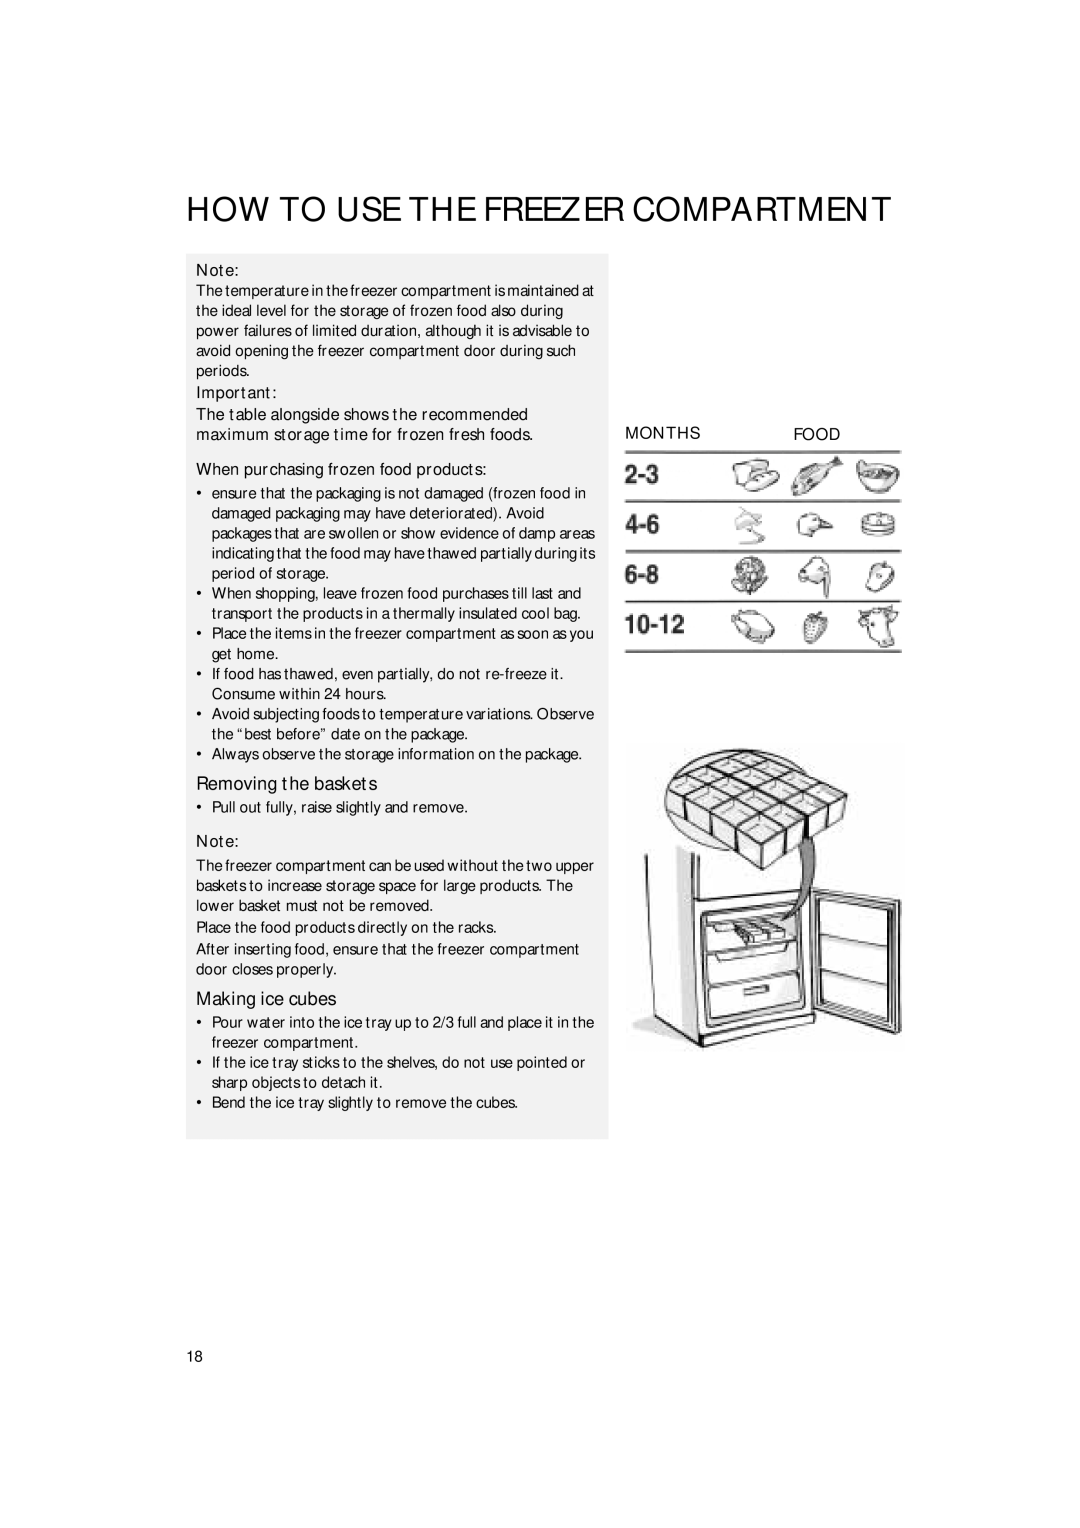 Smeg CR324A manual Removing the baskets, Making ice cubes, How To Use The Freezer Compartment, periods, Months, Food 